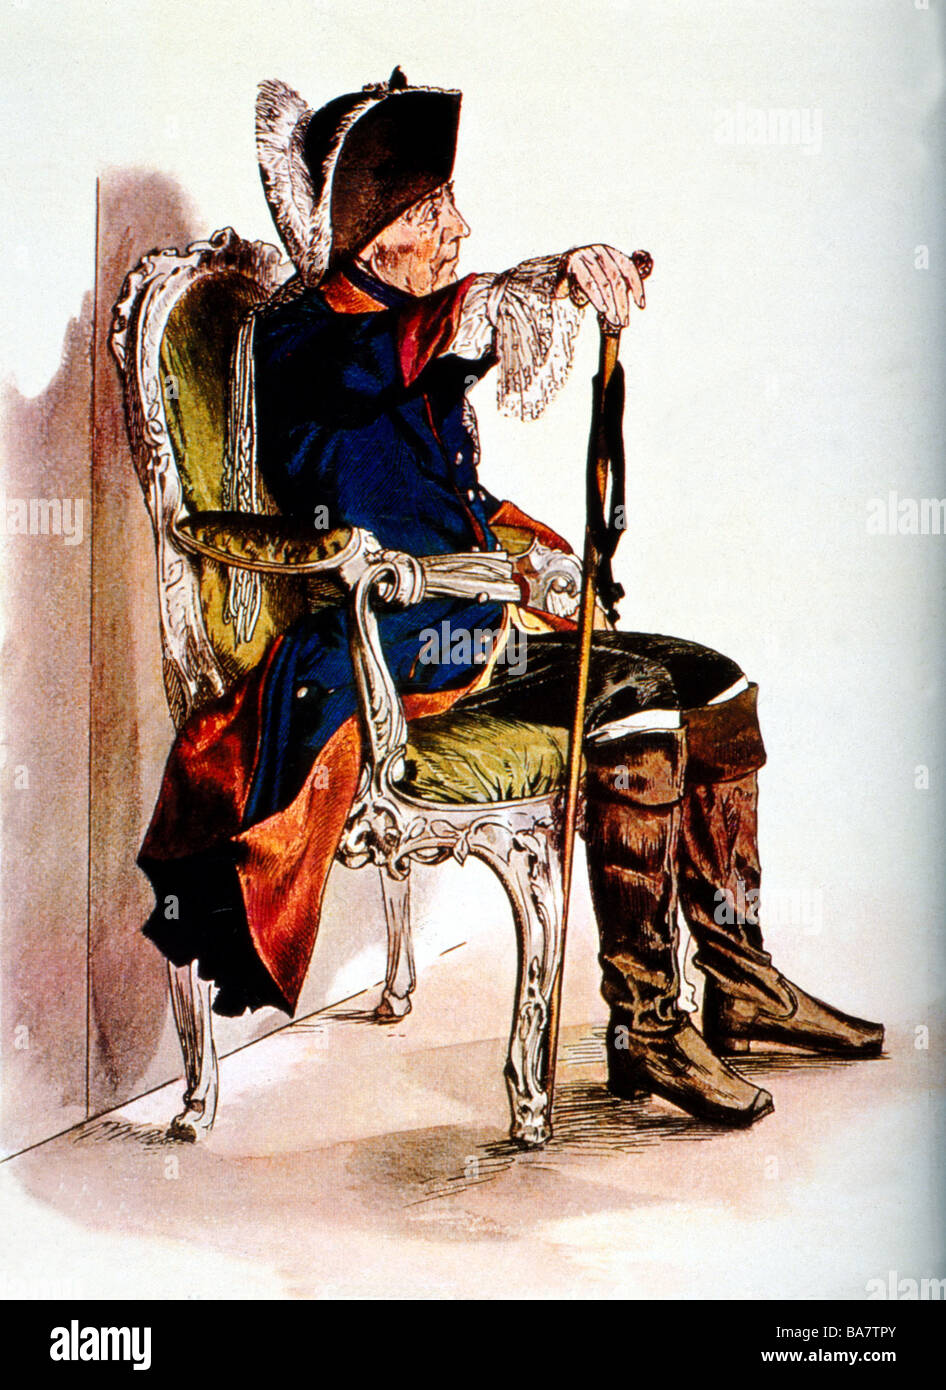 Frederick II 'the Great', 24.1.1712 - 17.6.1786, King of Prussia 31.5.1740 - 17.6.1786, drawing by Adolf von Menzel (1815 - 1905), Stock Photo